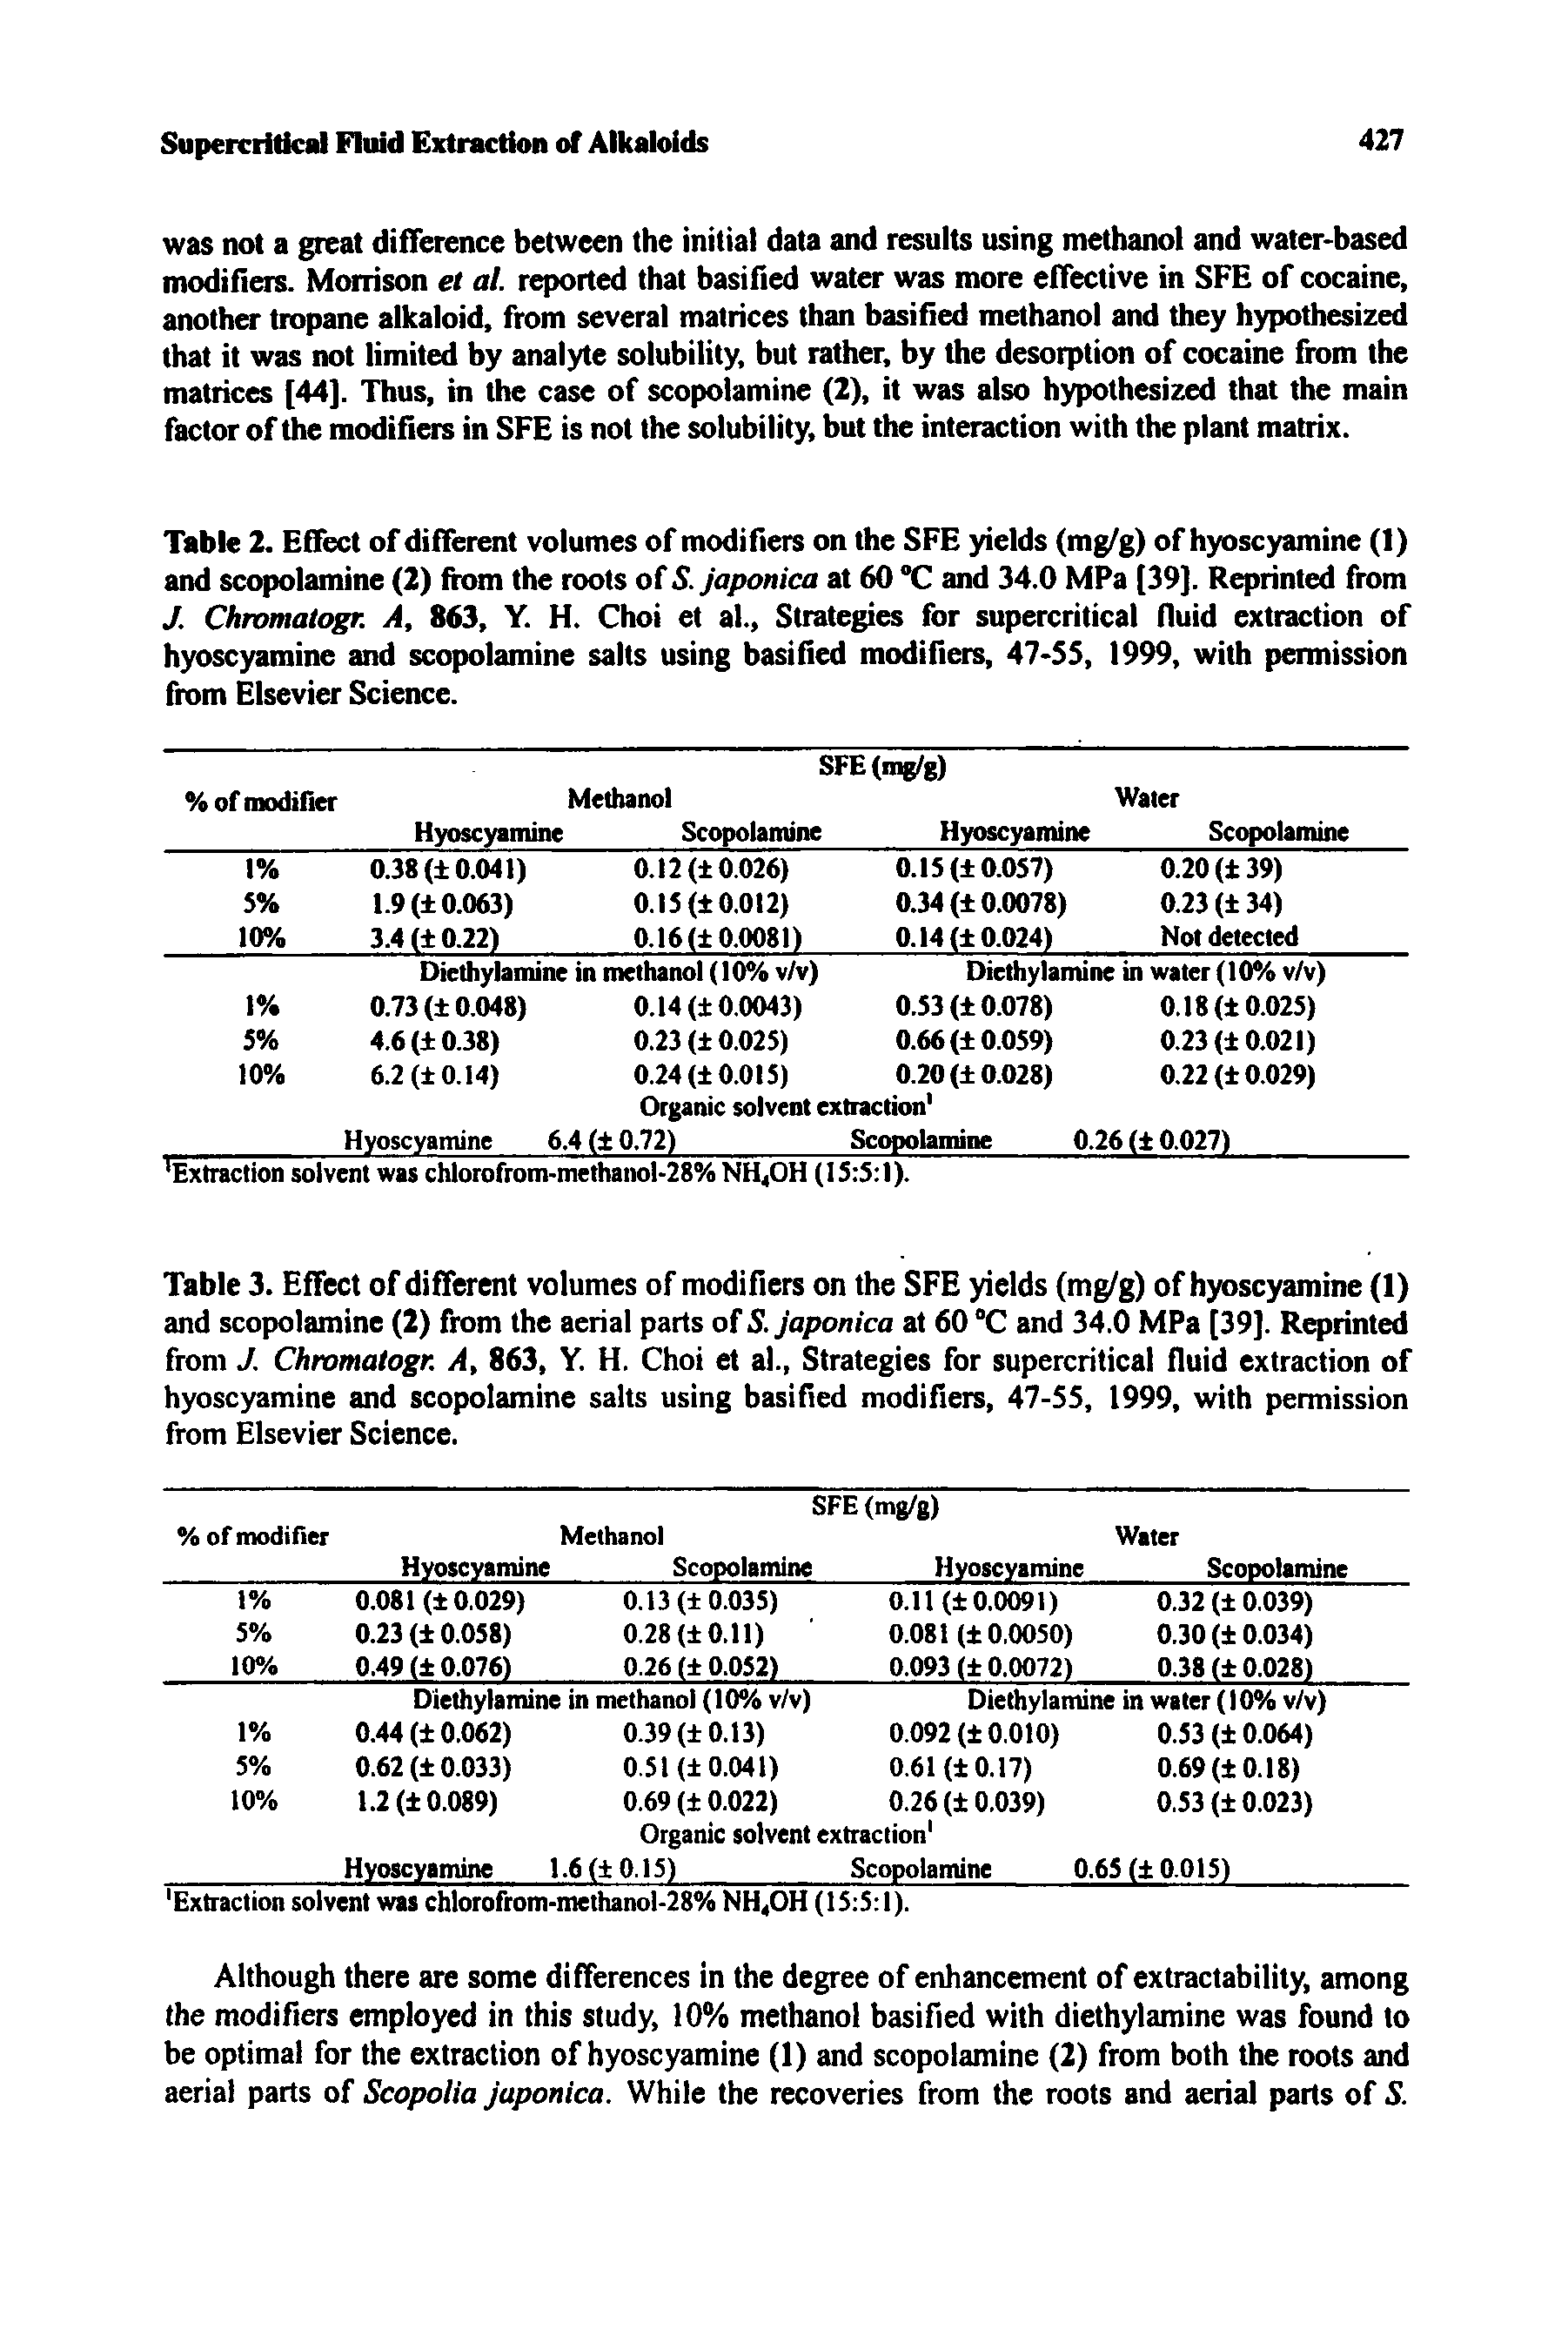 Table 2. Effect of different volumes of modifiers on the SFE yields (mg/g) of hyoscyamine (1) and scopolamine (2) from the roots of S. japonica at 60 °C and 34.0 MPa [39]. Reprinted from J. Chromatogr. A, 863, Y. H. Choi et al., Strategies for supercritical fluid extraction of hyoscyamine and scopolamine salts using basified modifiers, 47-53, 1999, with permission from Elsevier Science.